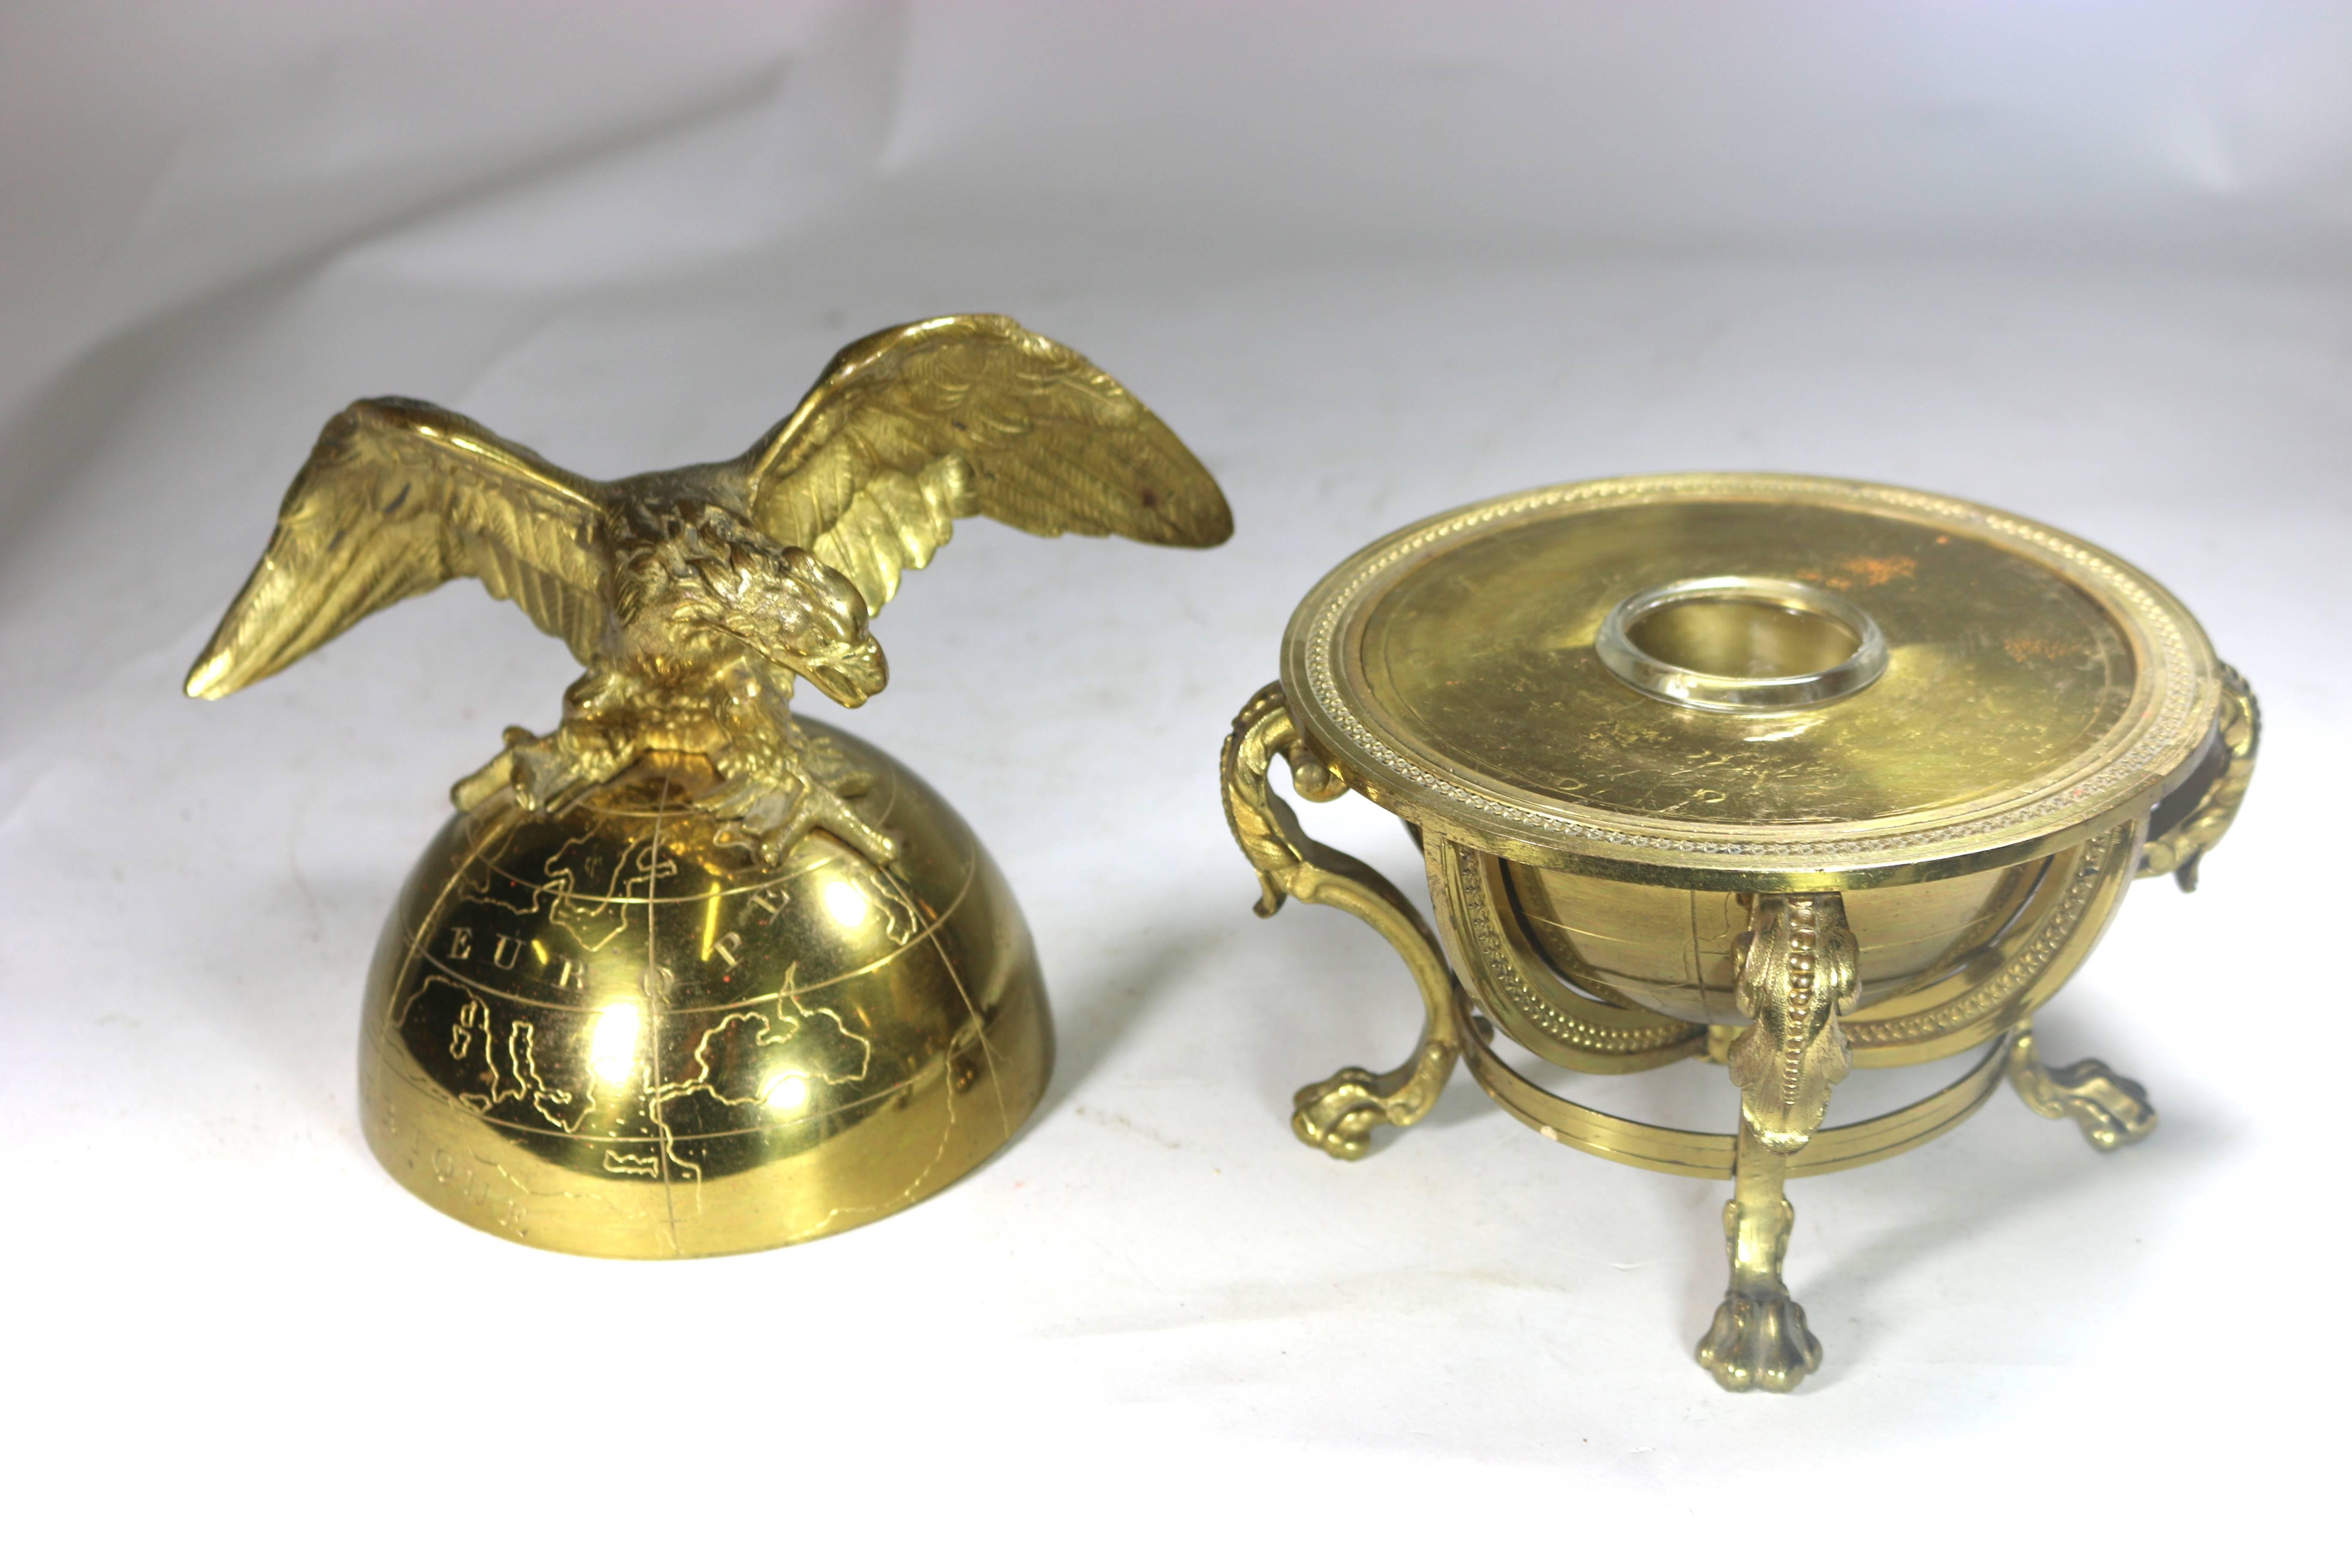 Superb large neoclassic brass globe with eagle atop which opens to a crystal ink holder which adorns a desktop, tabletop or book shelves with panache!! 
Beautiful repousee details with paw feet in a finely articulated globe holder-with Makers Mark